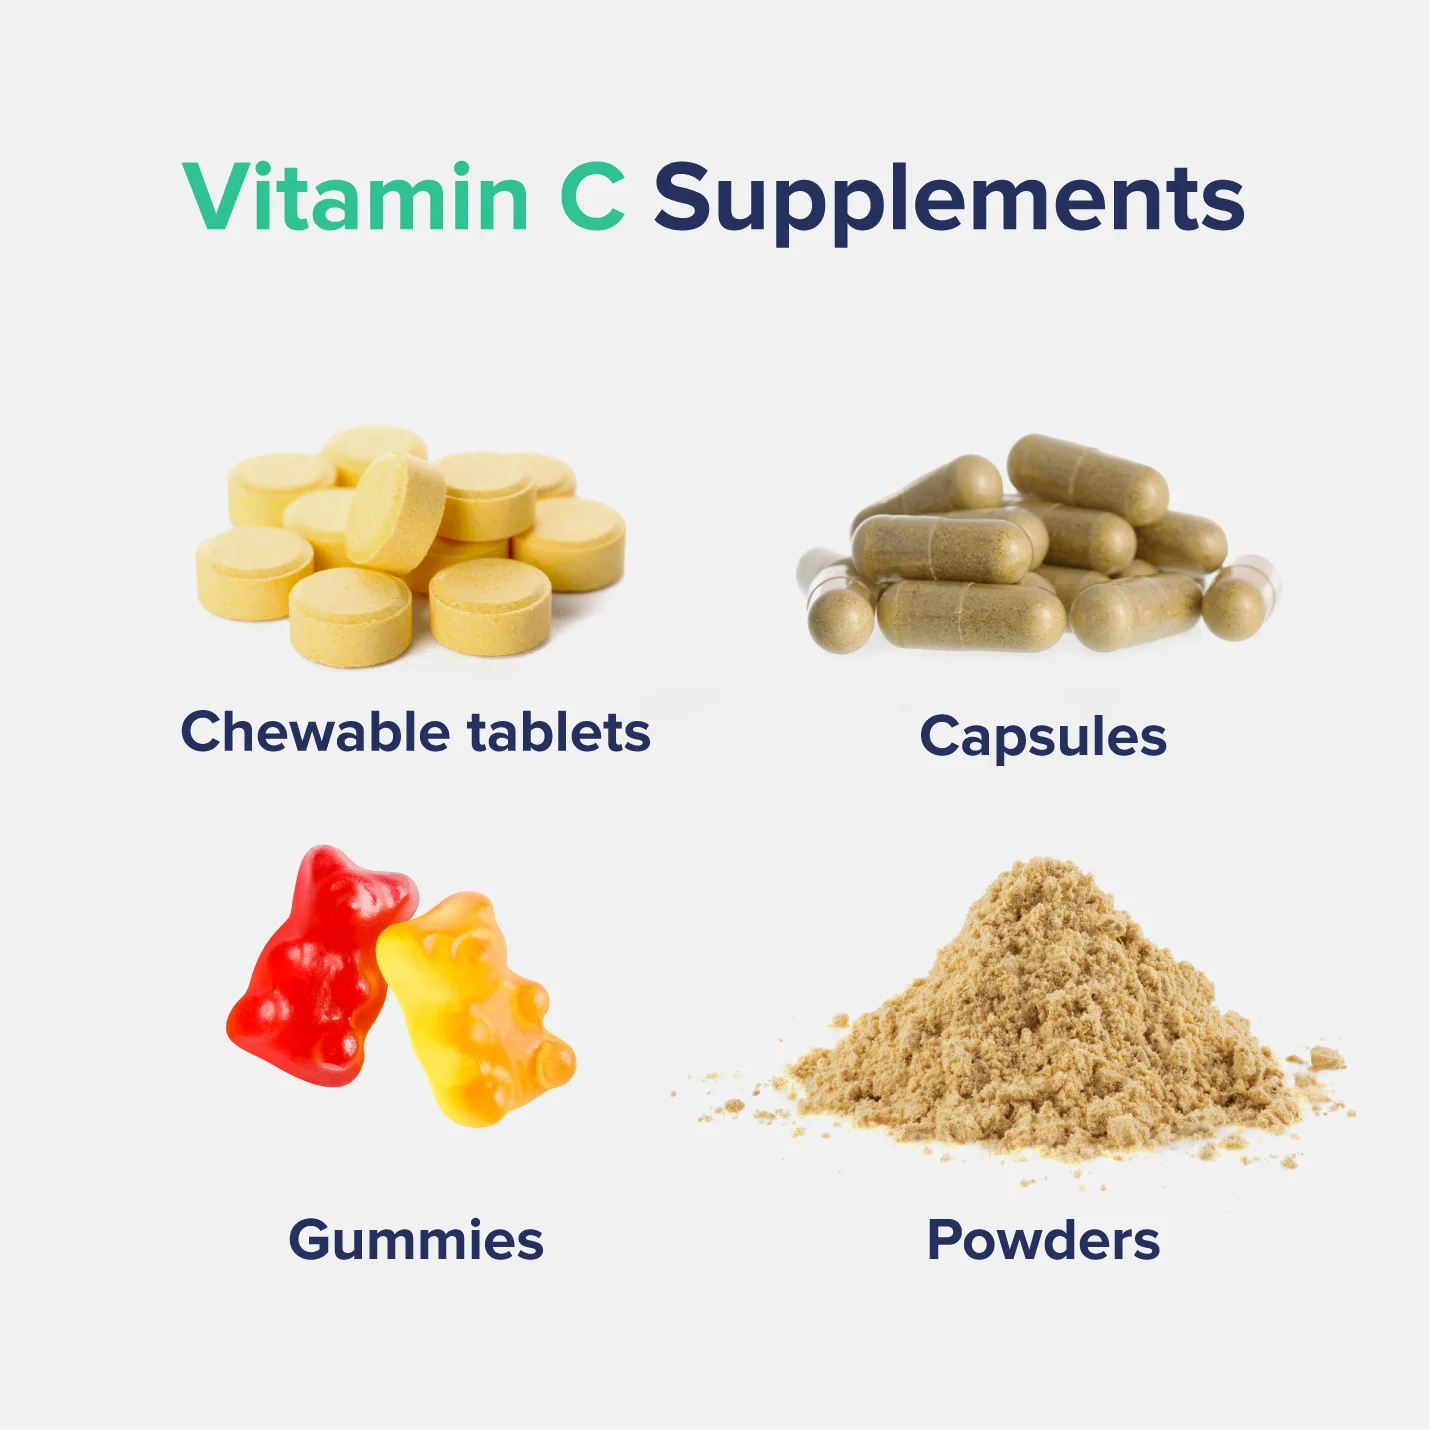 A graphic entitled "Vitamin C Supplements"  depicting labeled images of chewable tablets, capsules, gummies, and powders.